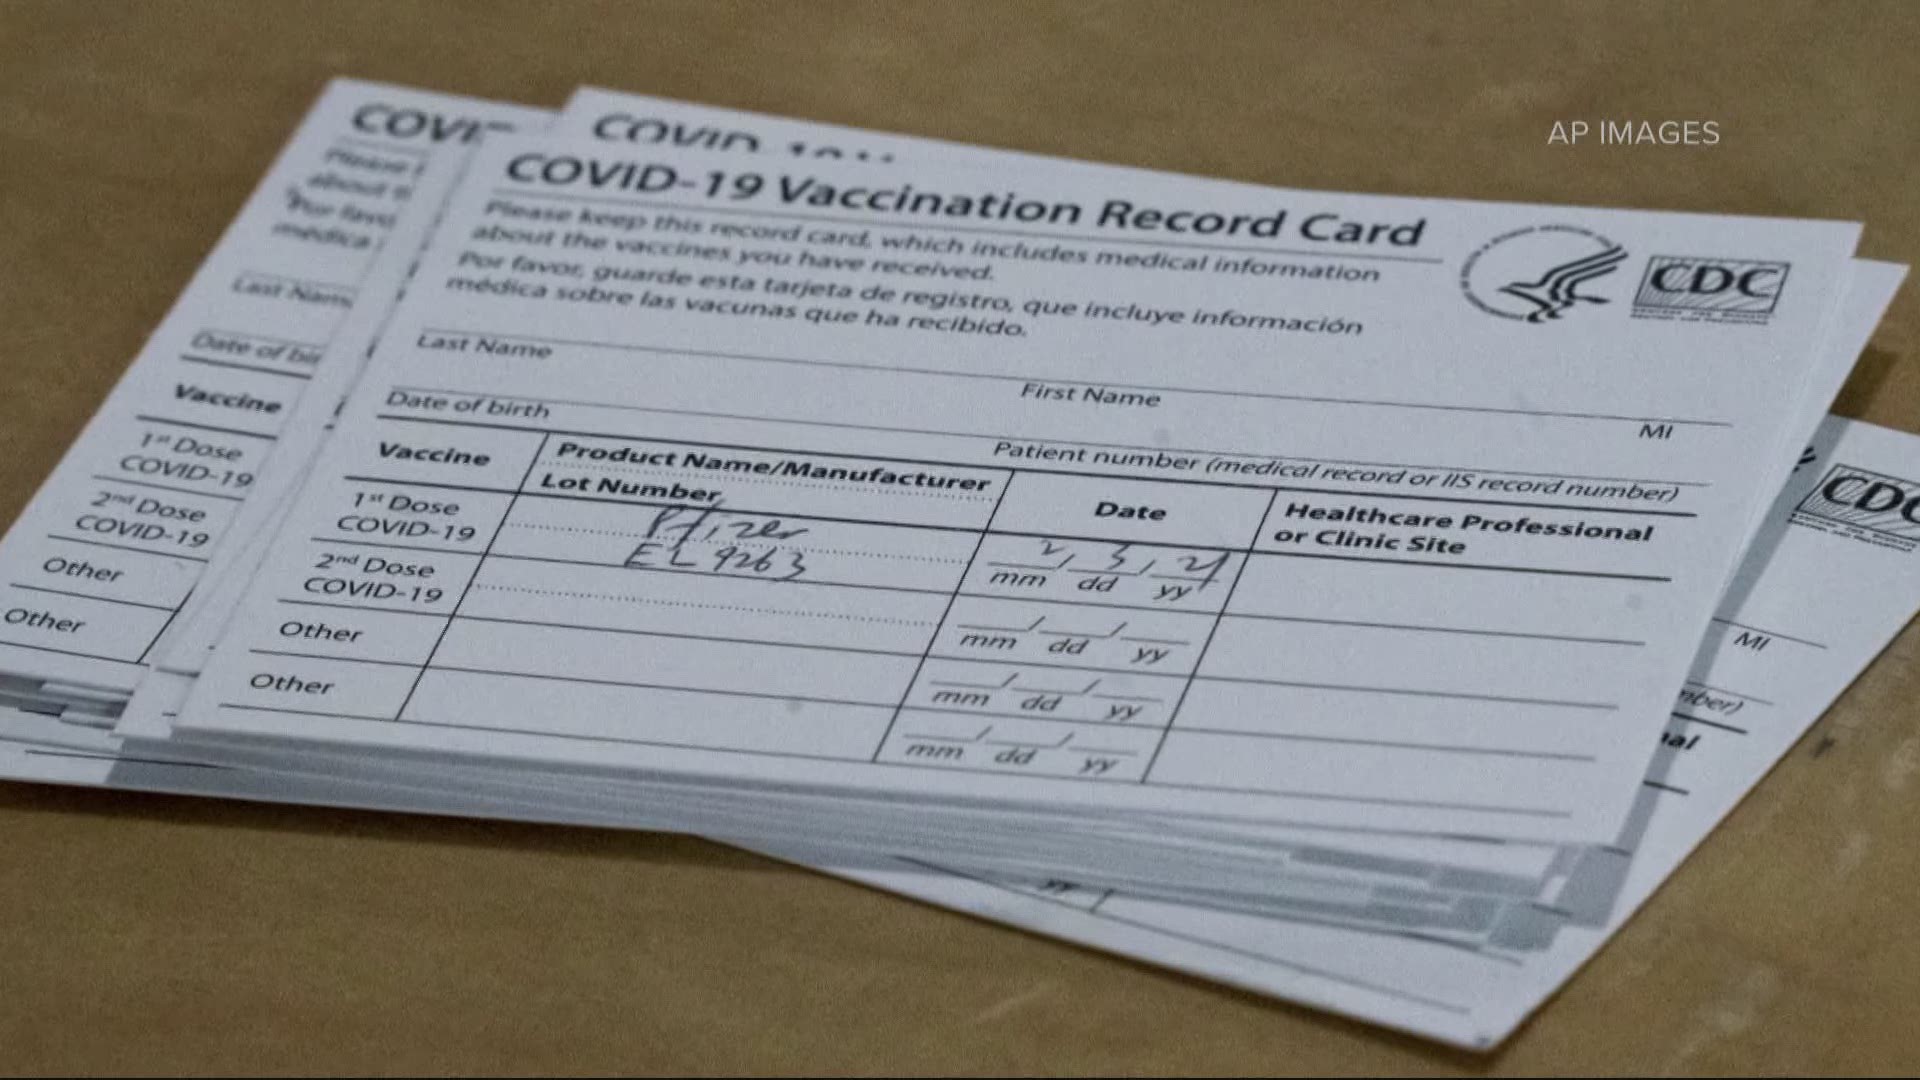 Cristin Severance answers your vaccination card questions.